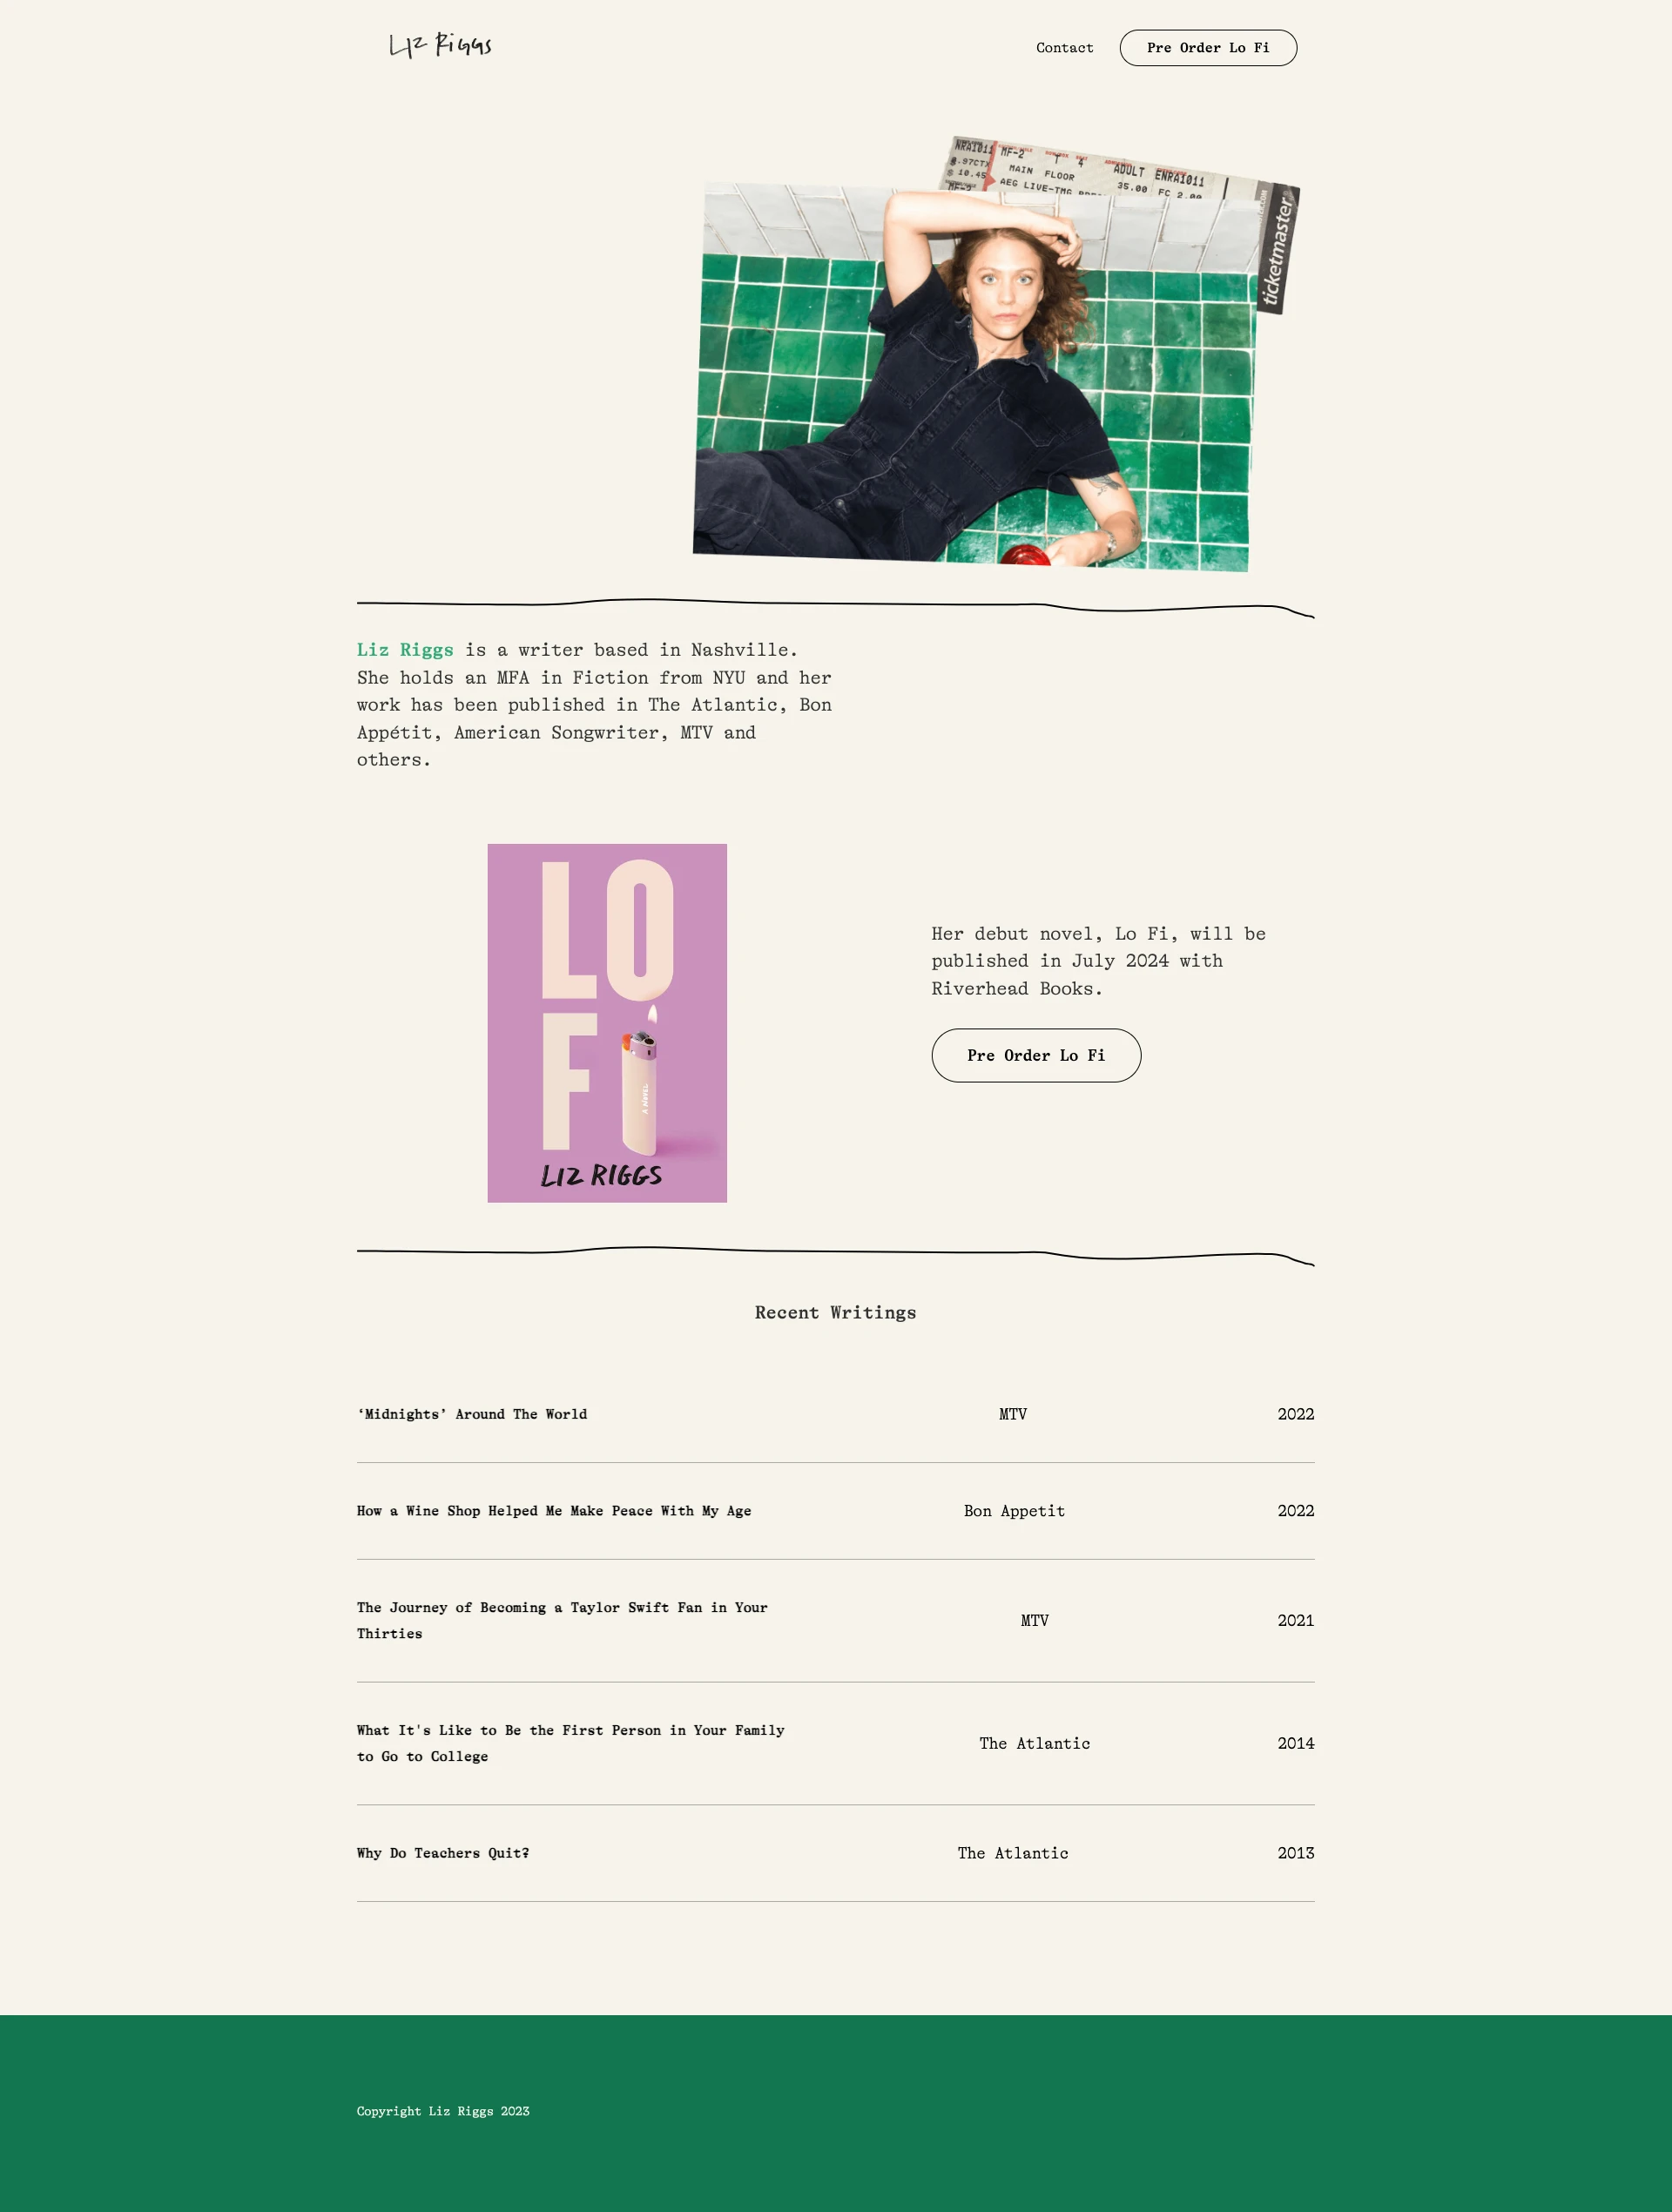 Liz Riggs Landing Page Example: Liz Riggs is a writer based in Nashville. She holds an MFA in Fiction from NYU and her work has been published in The Atlantic, Bon Appétit, American Songwriter, MTV and others.